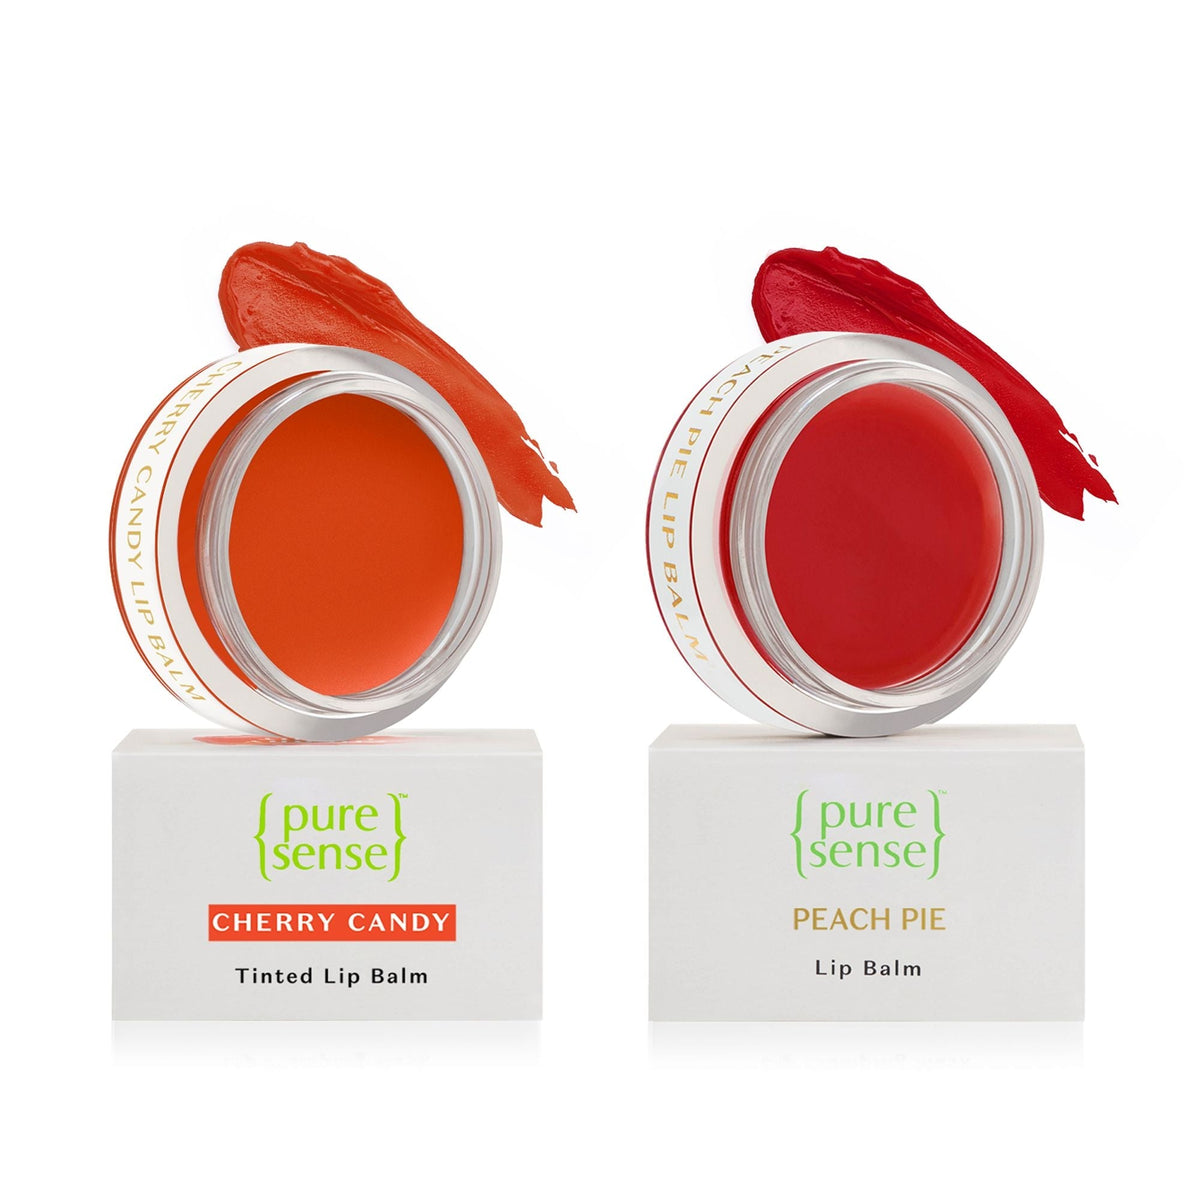 Cherry Candy Tinted Lip Balm 5ml + Pure Sense Peach Pie Lip Balm 5ml | Pack of 2 | From the makers of Parachute Advansed | 10ml